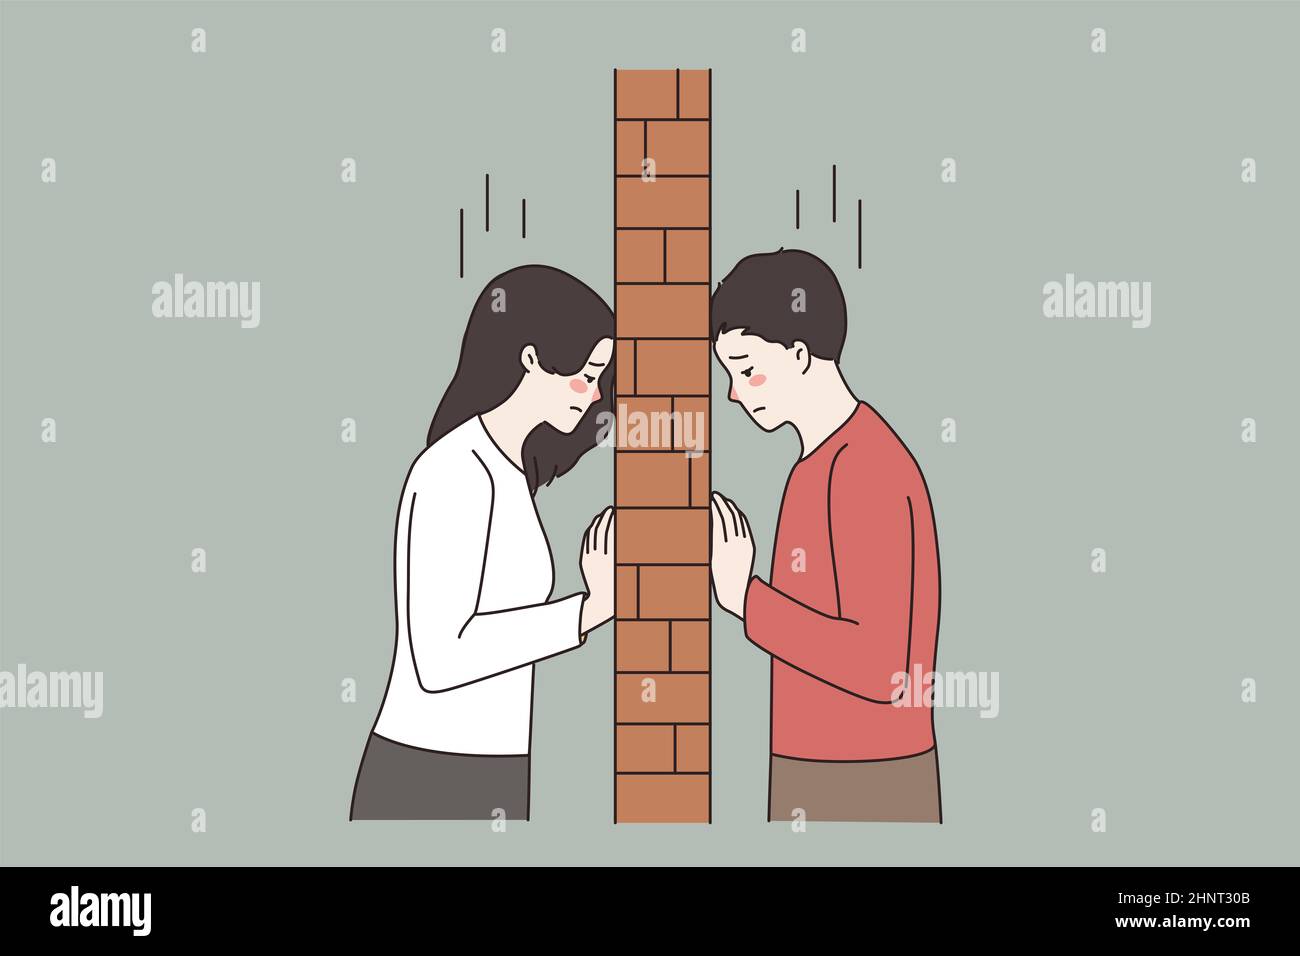 Unhappy young couple separated with brick wall. Upset man and woman lovers divided, have relationship problems. Breakup, divorce, separation. Misunder Stock Photo